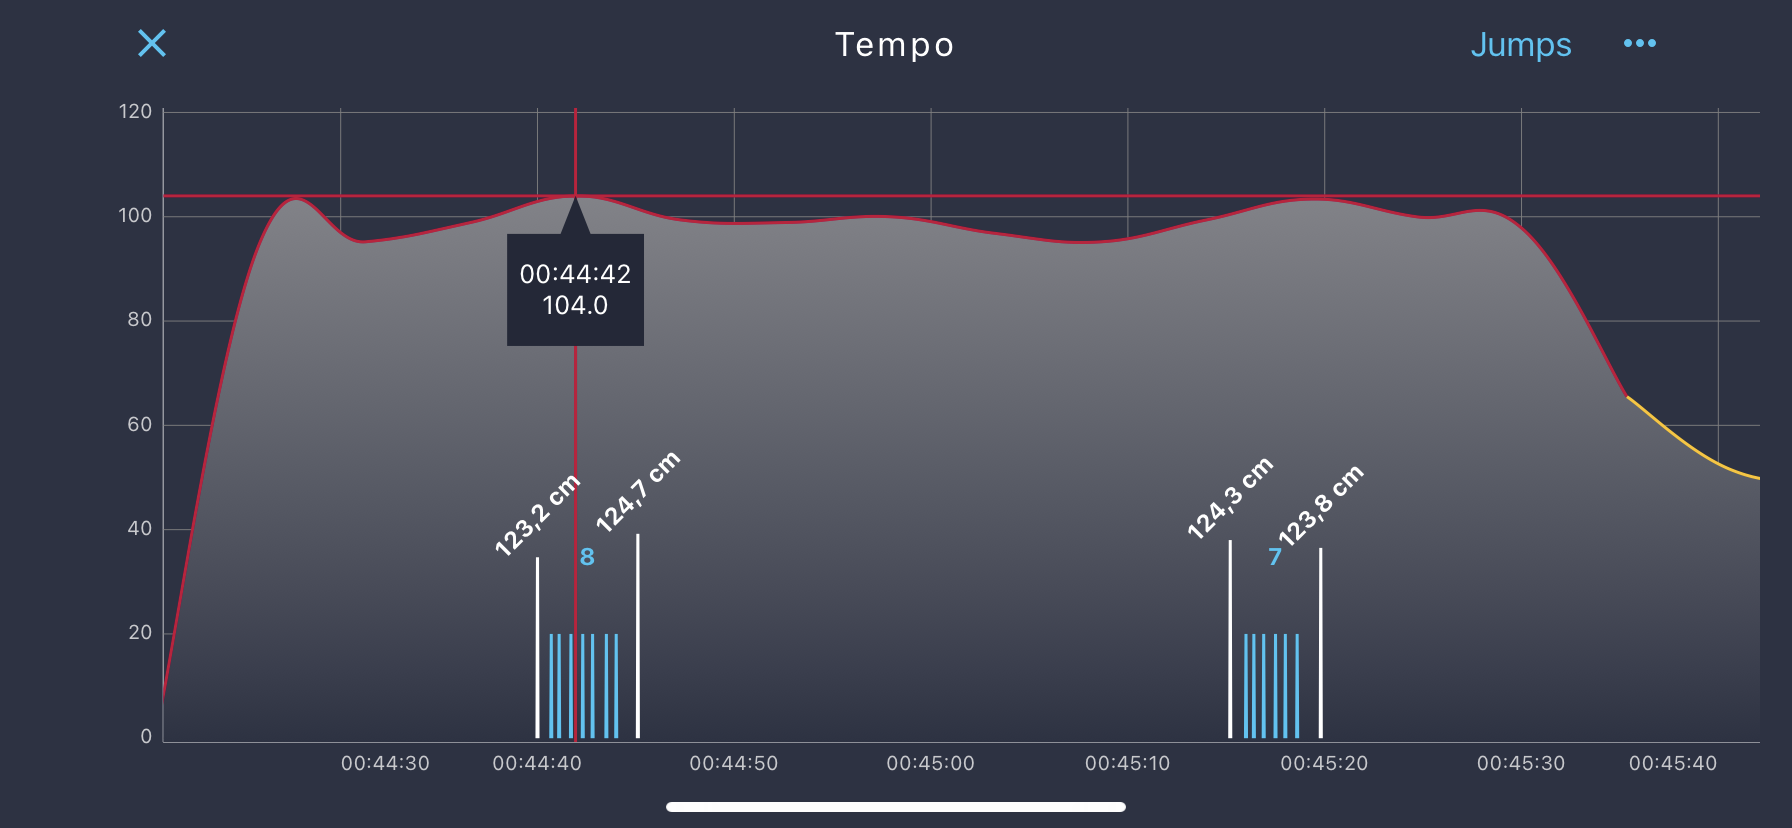 Tempo graph - the bubble by the red line shows tempo of 104.0 spm